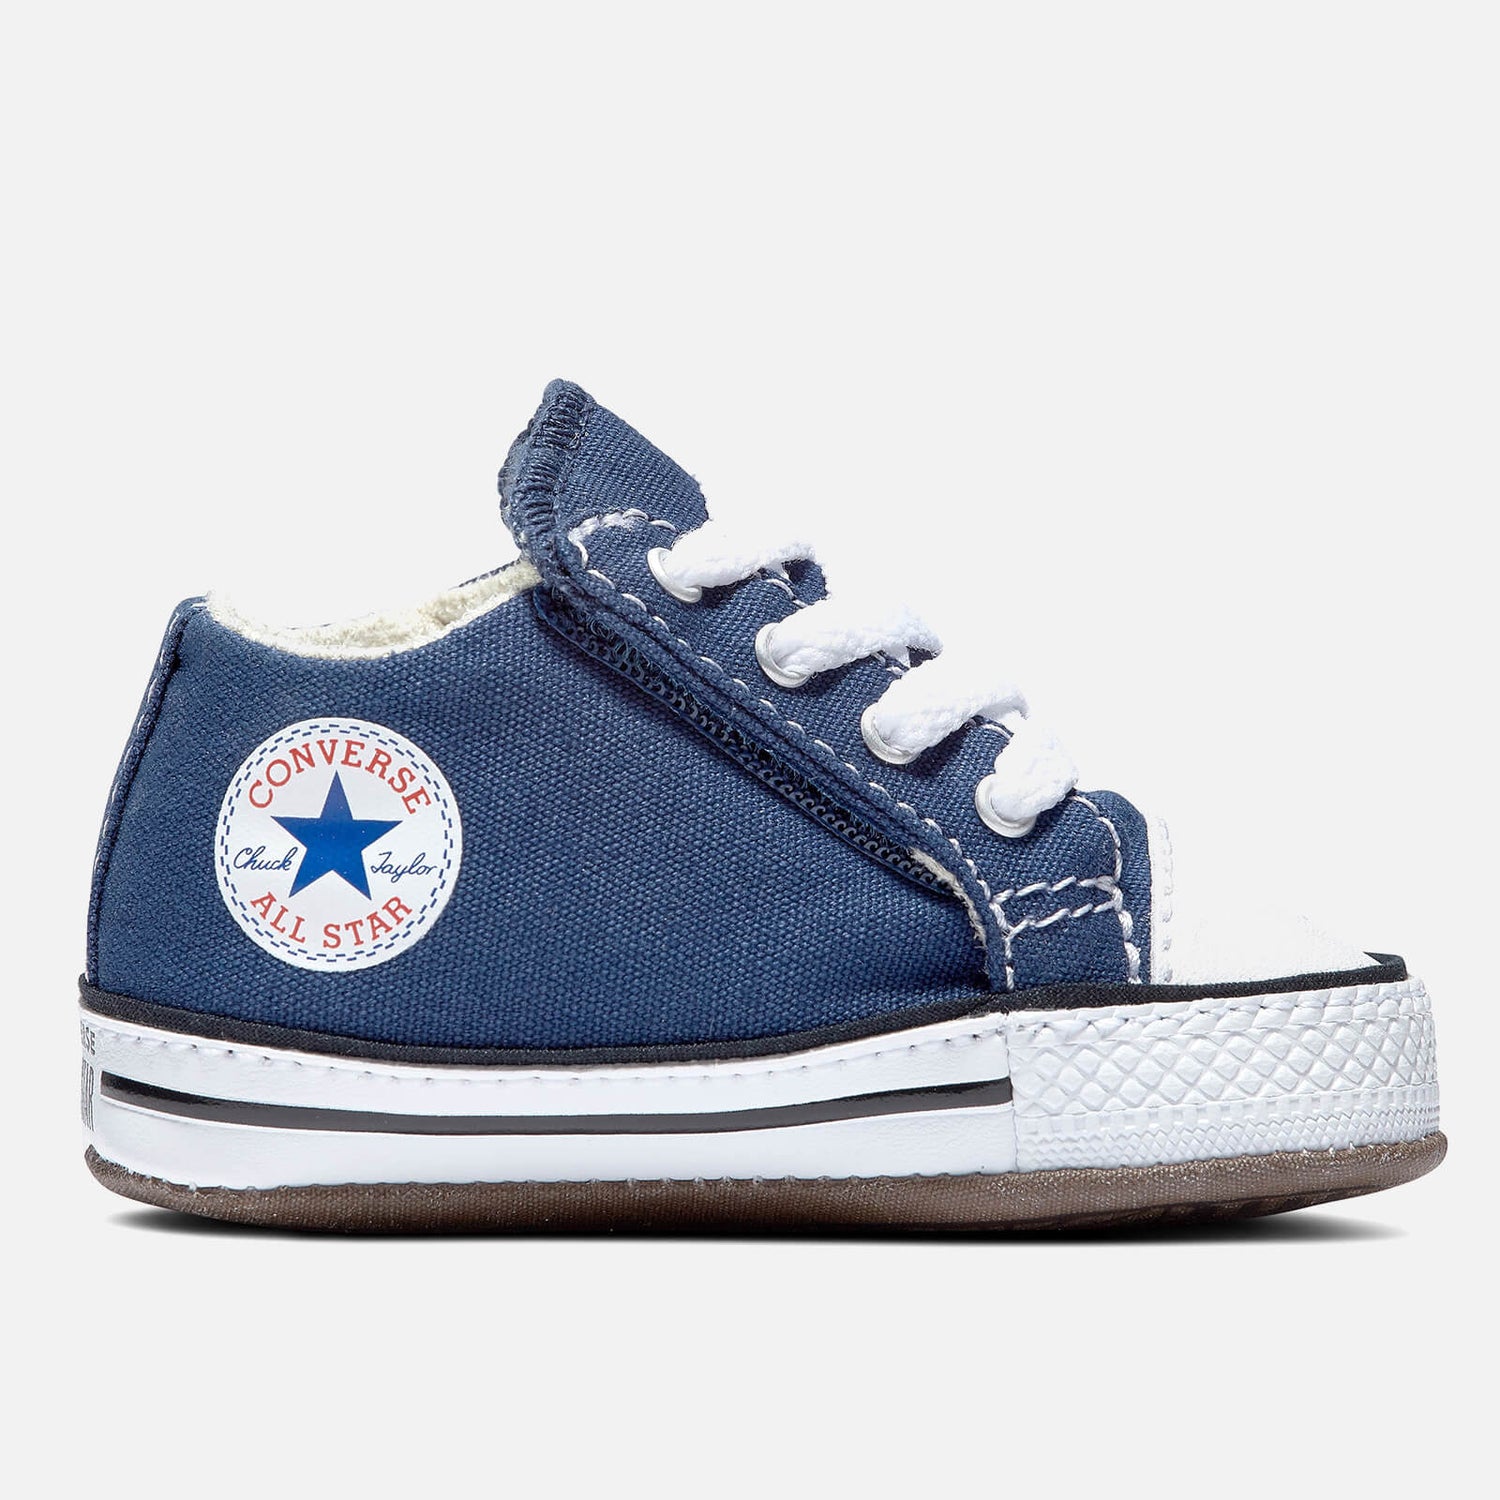 Converse Babys' Chuck Taylor All Star Cribster Soft Trainers - Navy